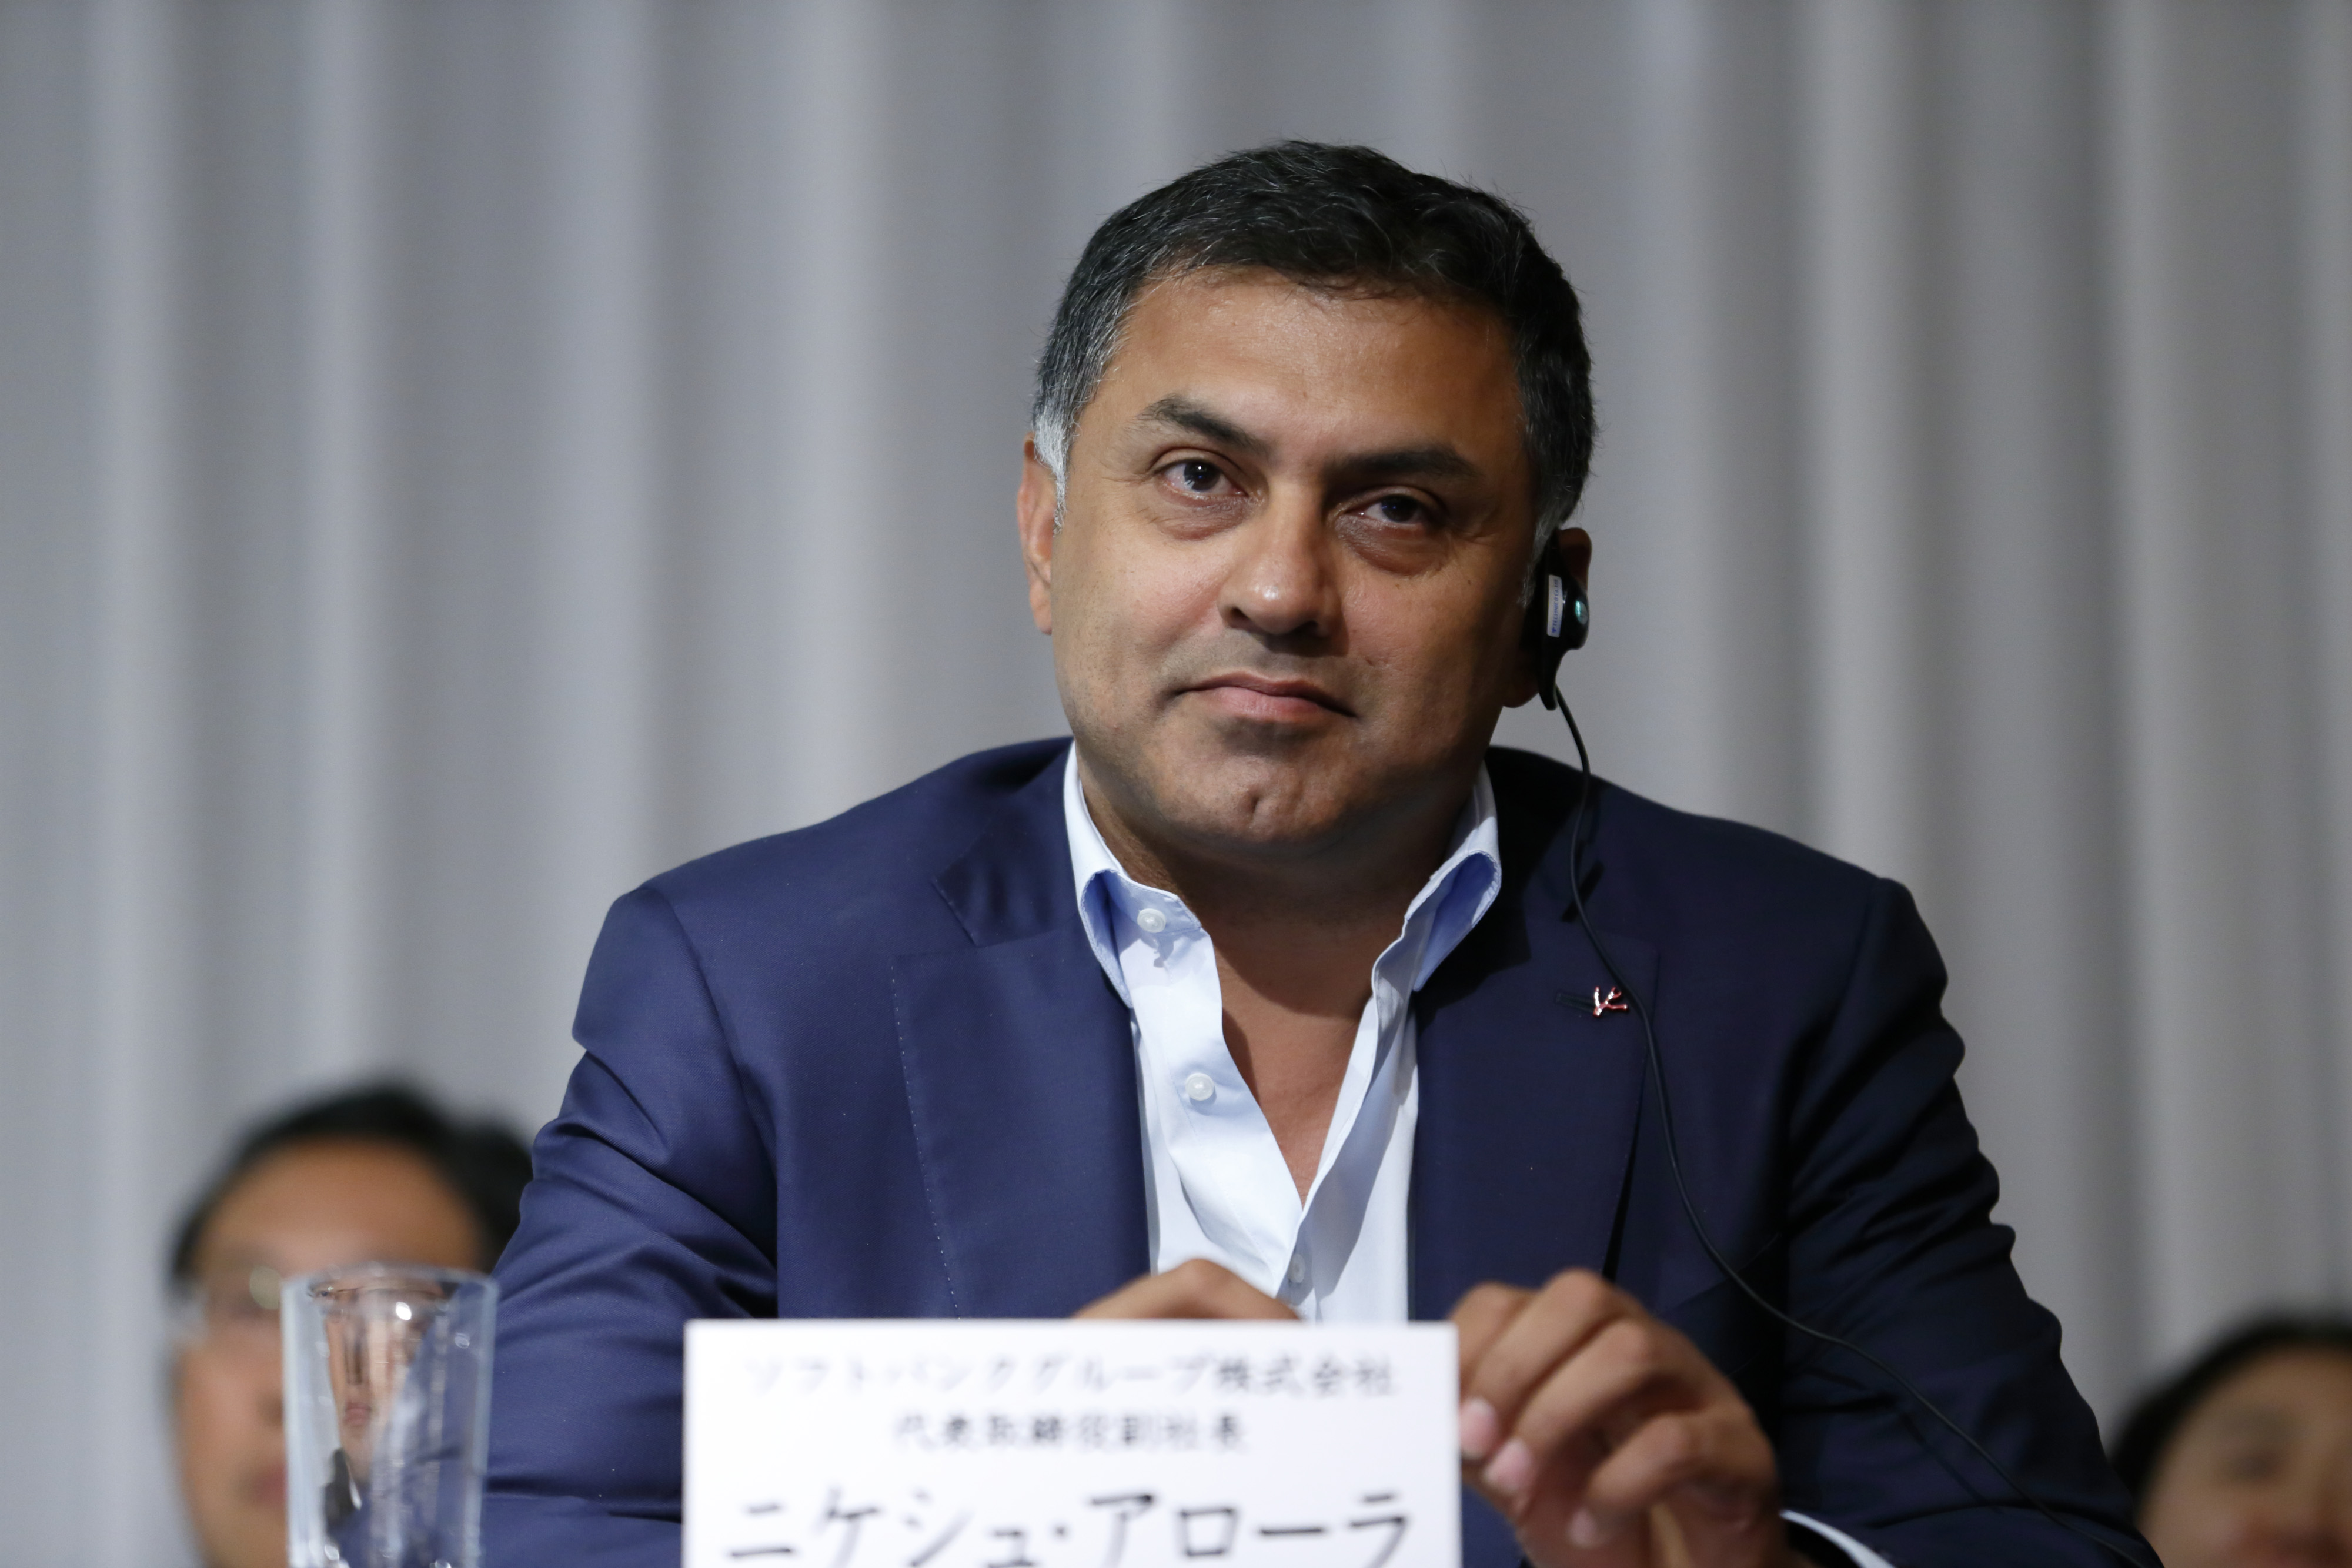 Nikesh Arora, president and chief operating officer of SoftBank Group Corp., looks on during a news conference in Tokyo, Japan, on Tuesday, May 10, 2016. (Tomohiro Ohsumi&mdash;Bloomberg/Getty Images)